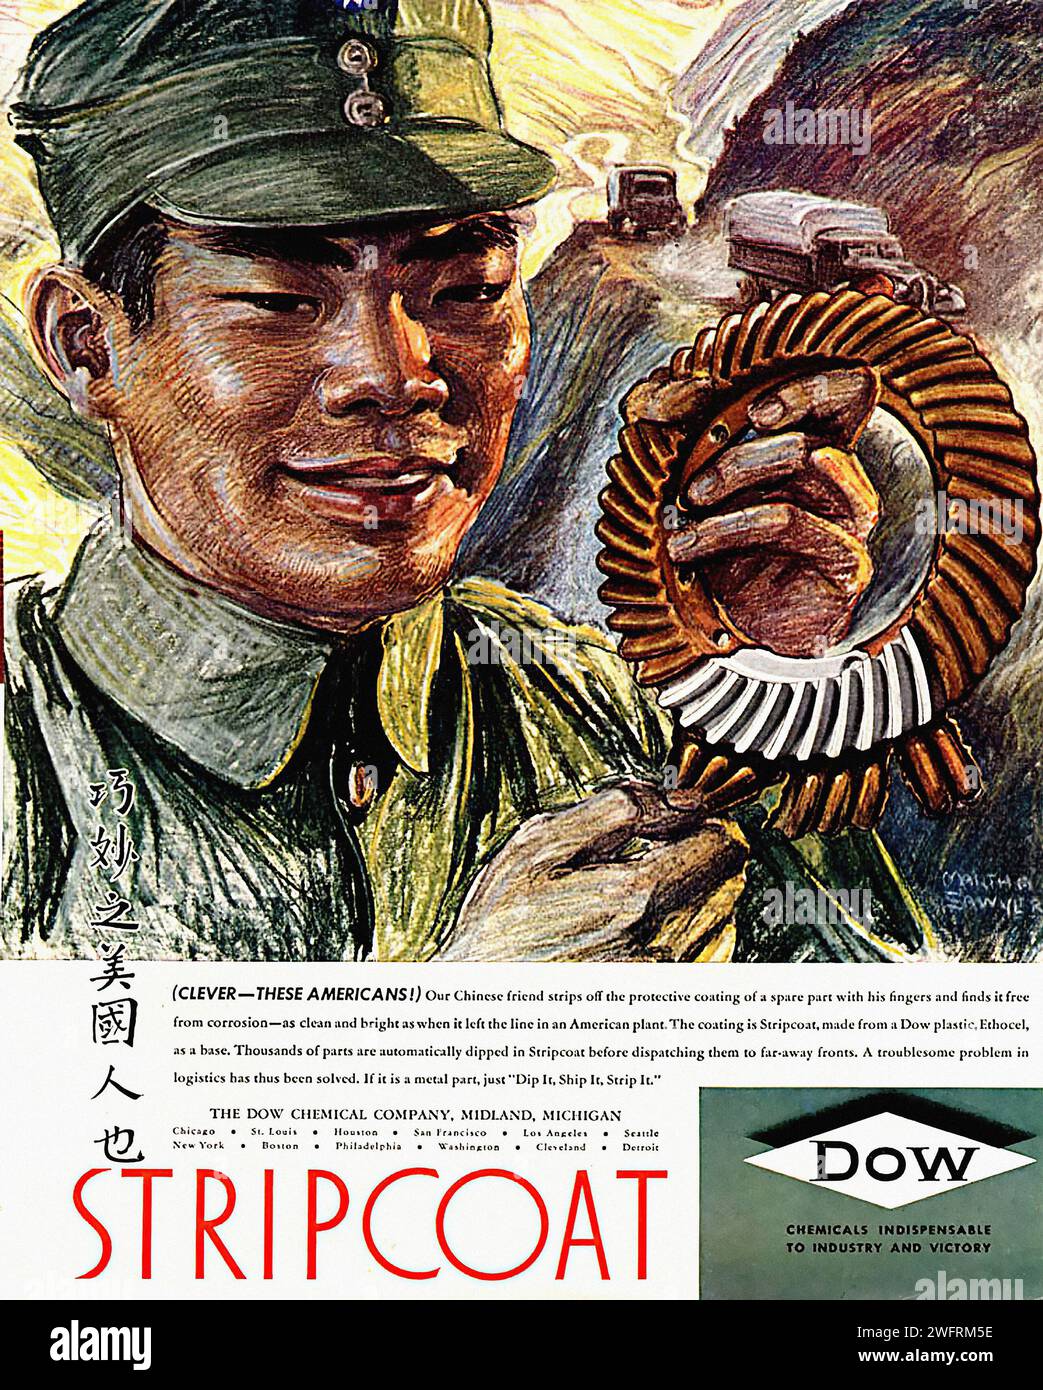 “CLEVER - THESE AMERICANS!”  This is an advertisement for Dow Chemical Company’s Stripcoat product, originating from the United States during the World War II era. The advertisement features a painting of a  The text on the advertisement promotes Stripcoat as a smooth, tough film that covers like a dream, offering paint protection, life-saving, beautifying, and feather-saving qualities. The bottom of the advertisement features the Dow Chemical Company logo. - American (U.S.) advertising, World War II era Stock Photo